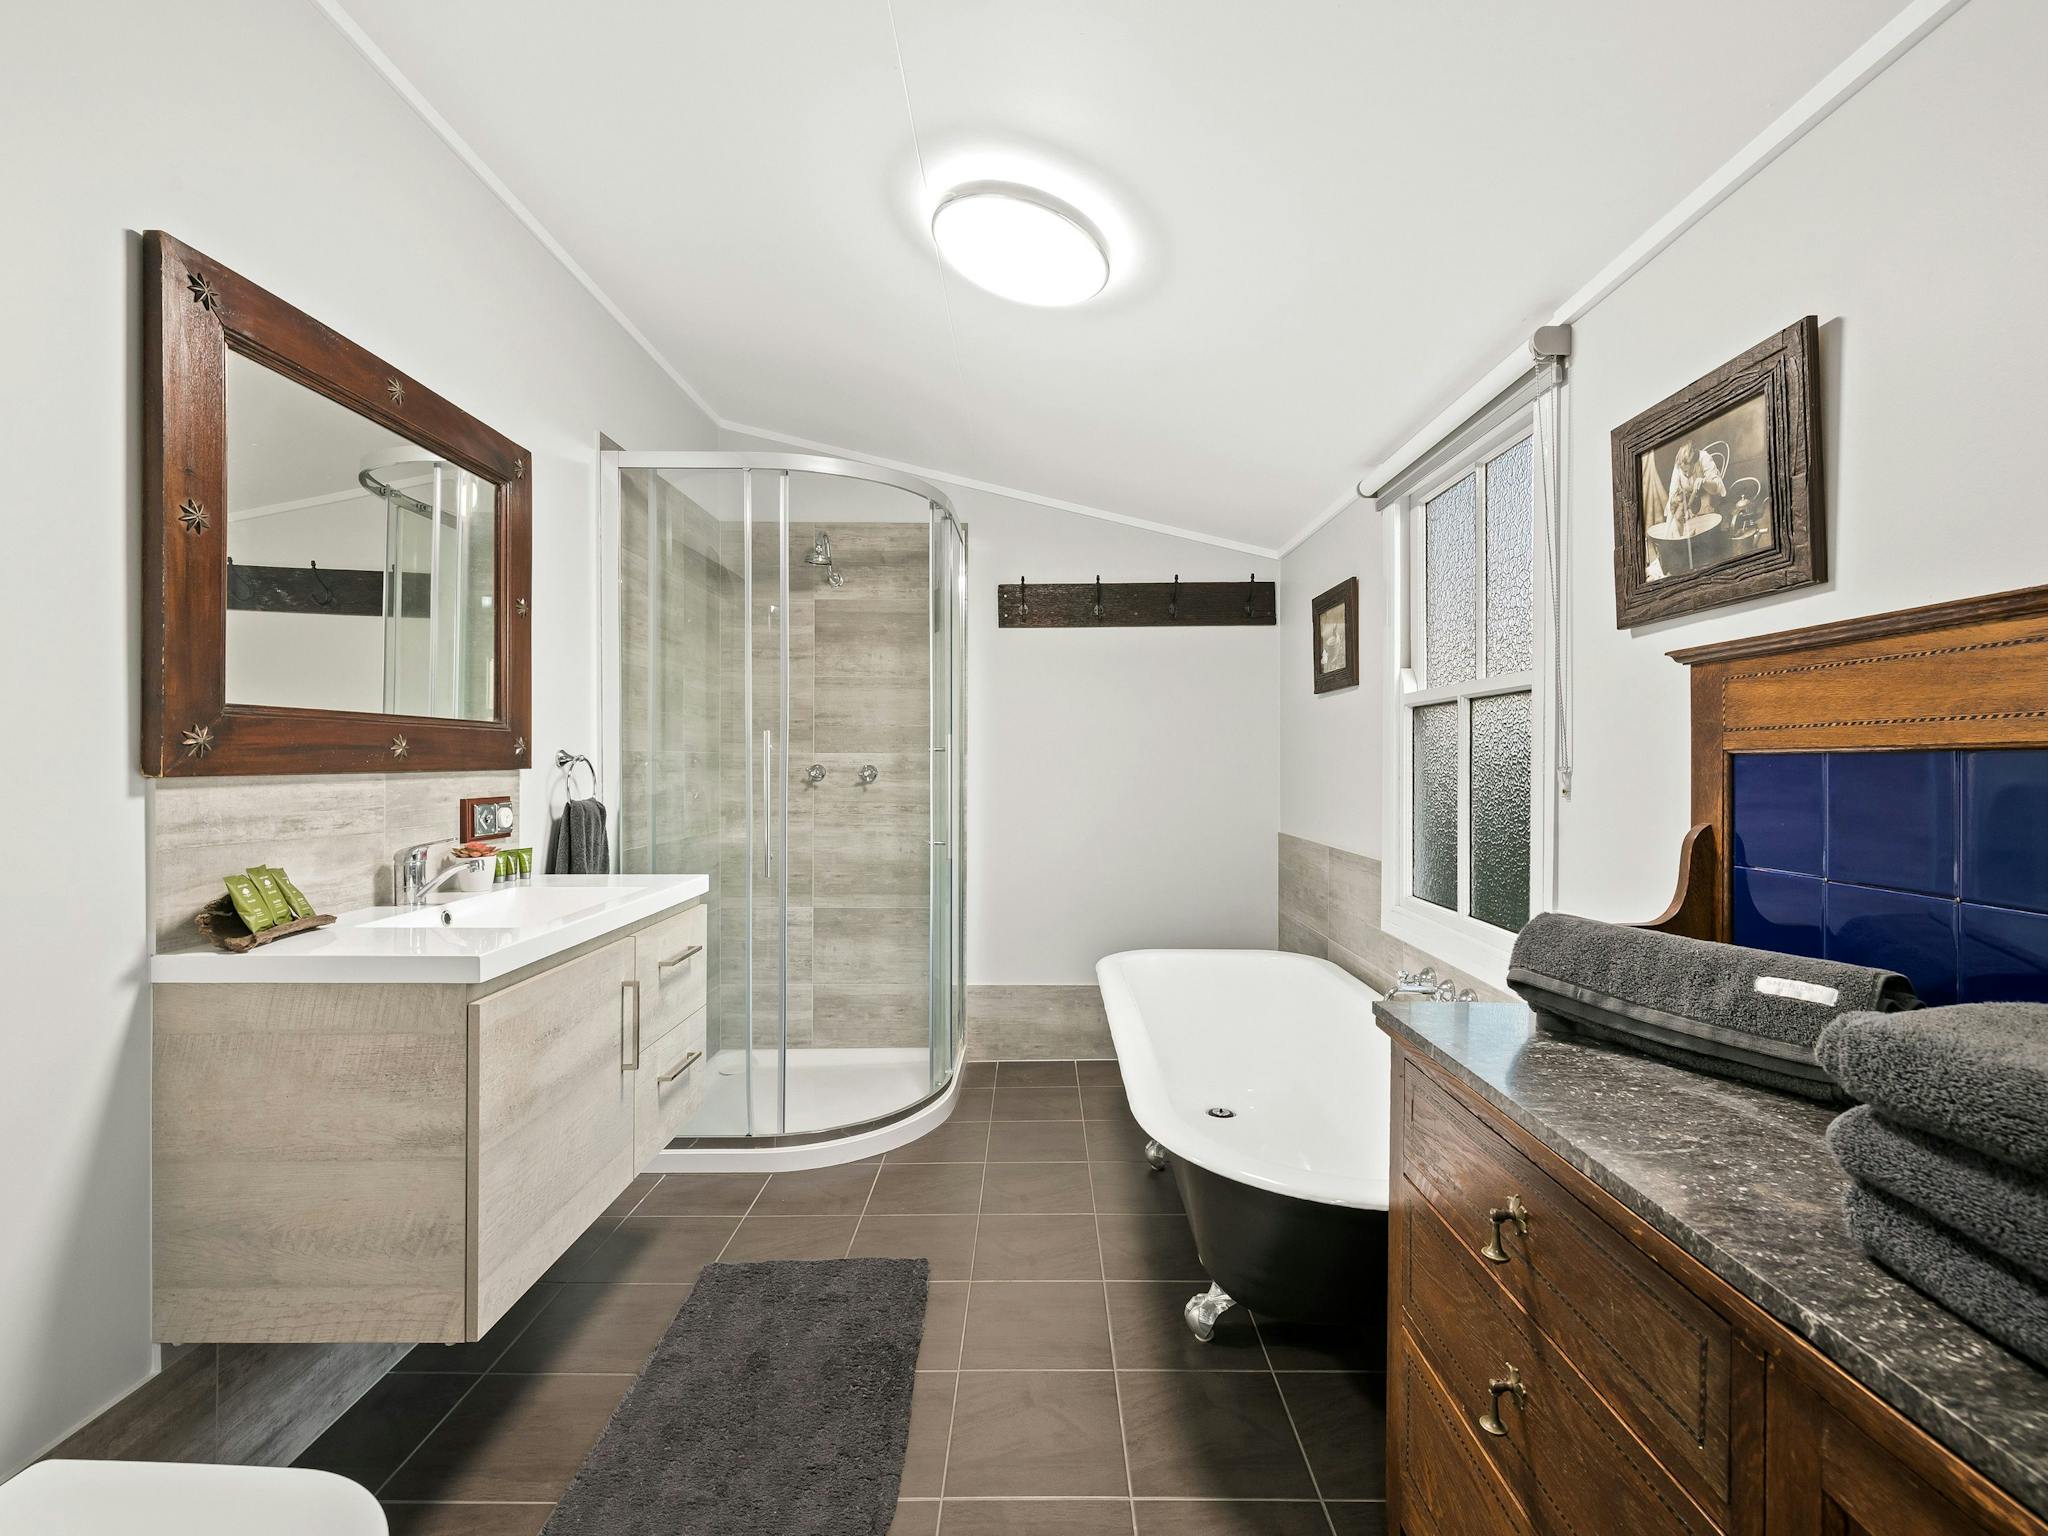 Mountview Homestead bathroom combines the new with the old with a shower and a claw foot bath.